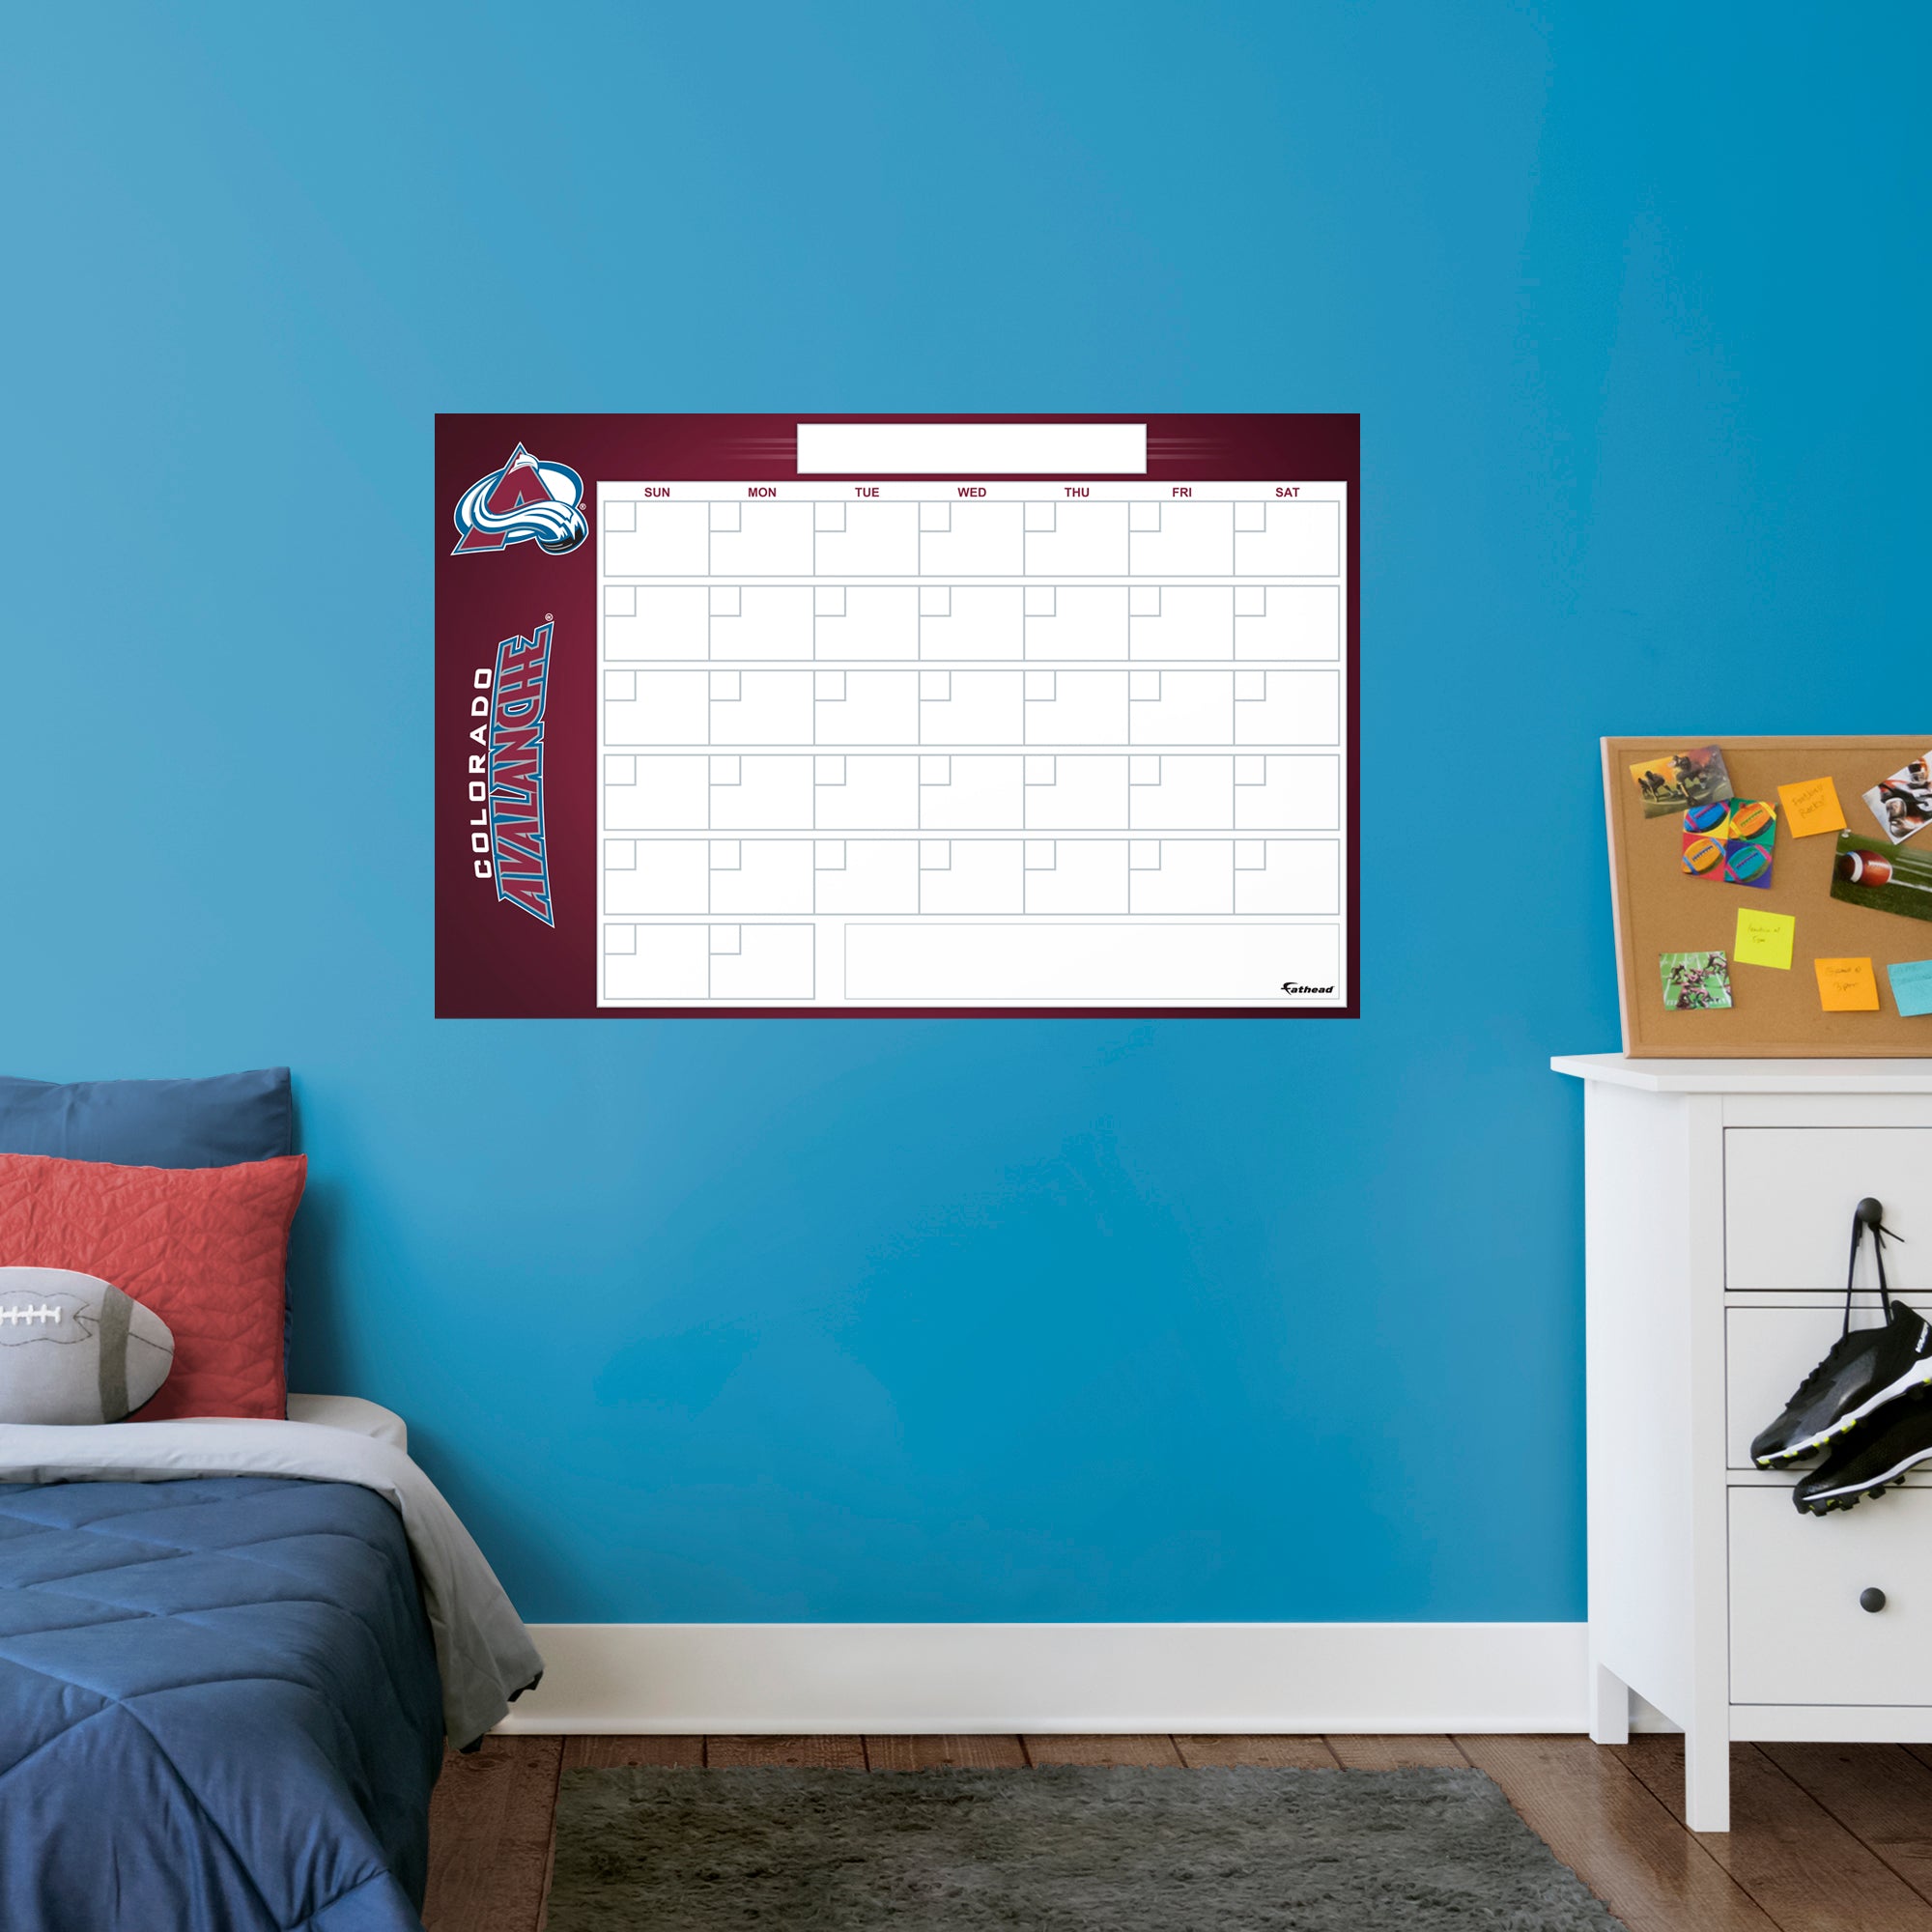 Colorado Avalanche Dry Erase Calendar - Officially Licensed NHL Removable Wall Decal Giant Decal (57"W x 34"H) by Fathead | Viny